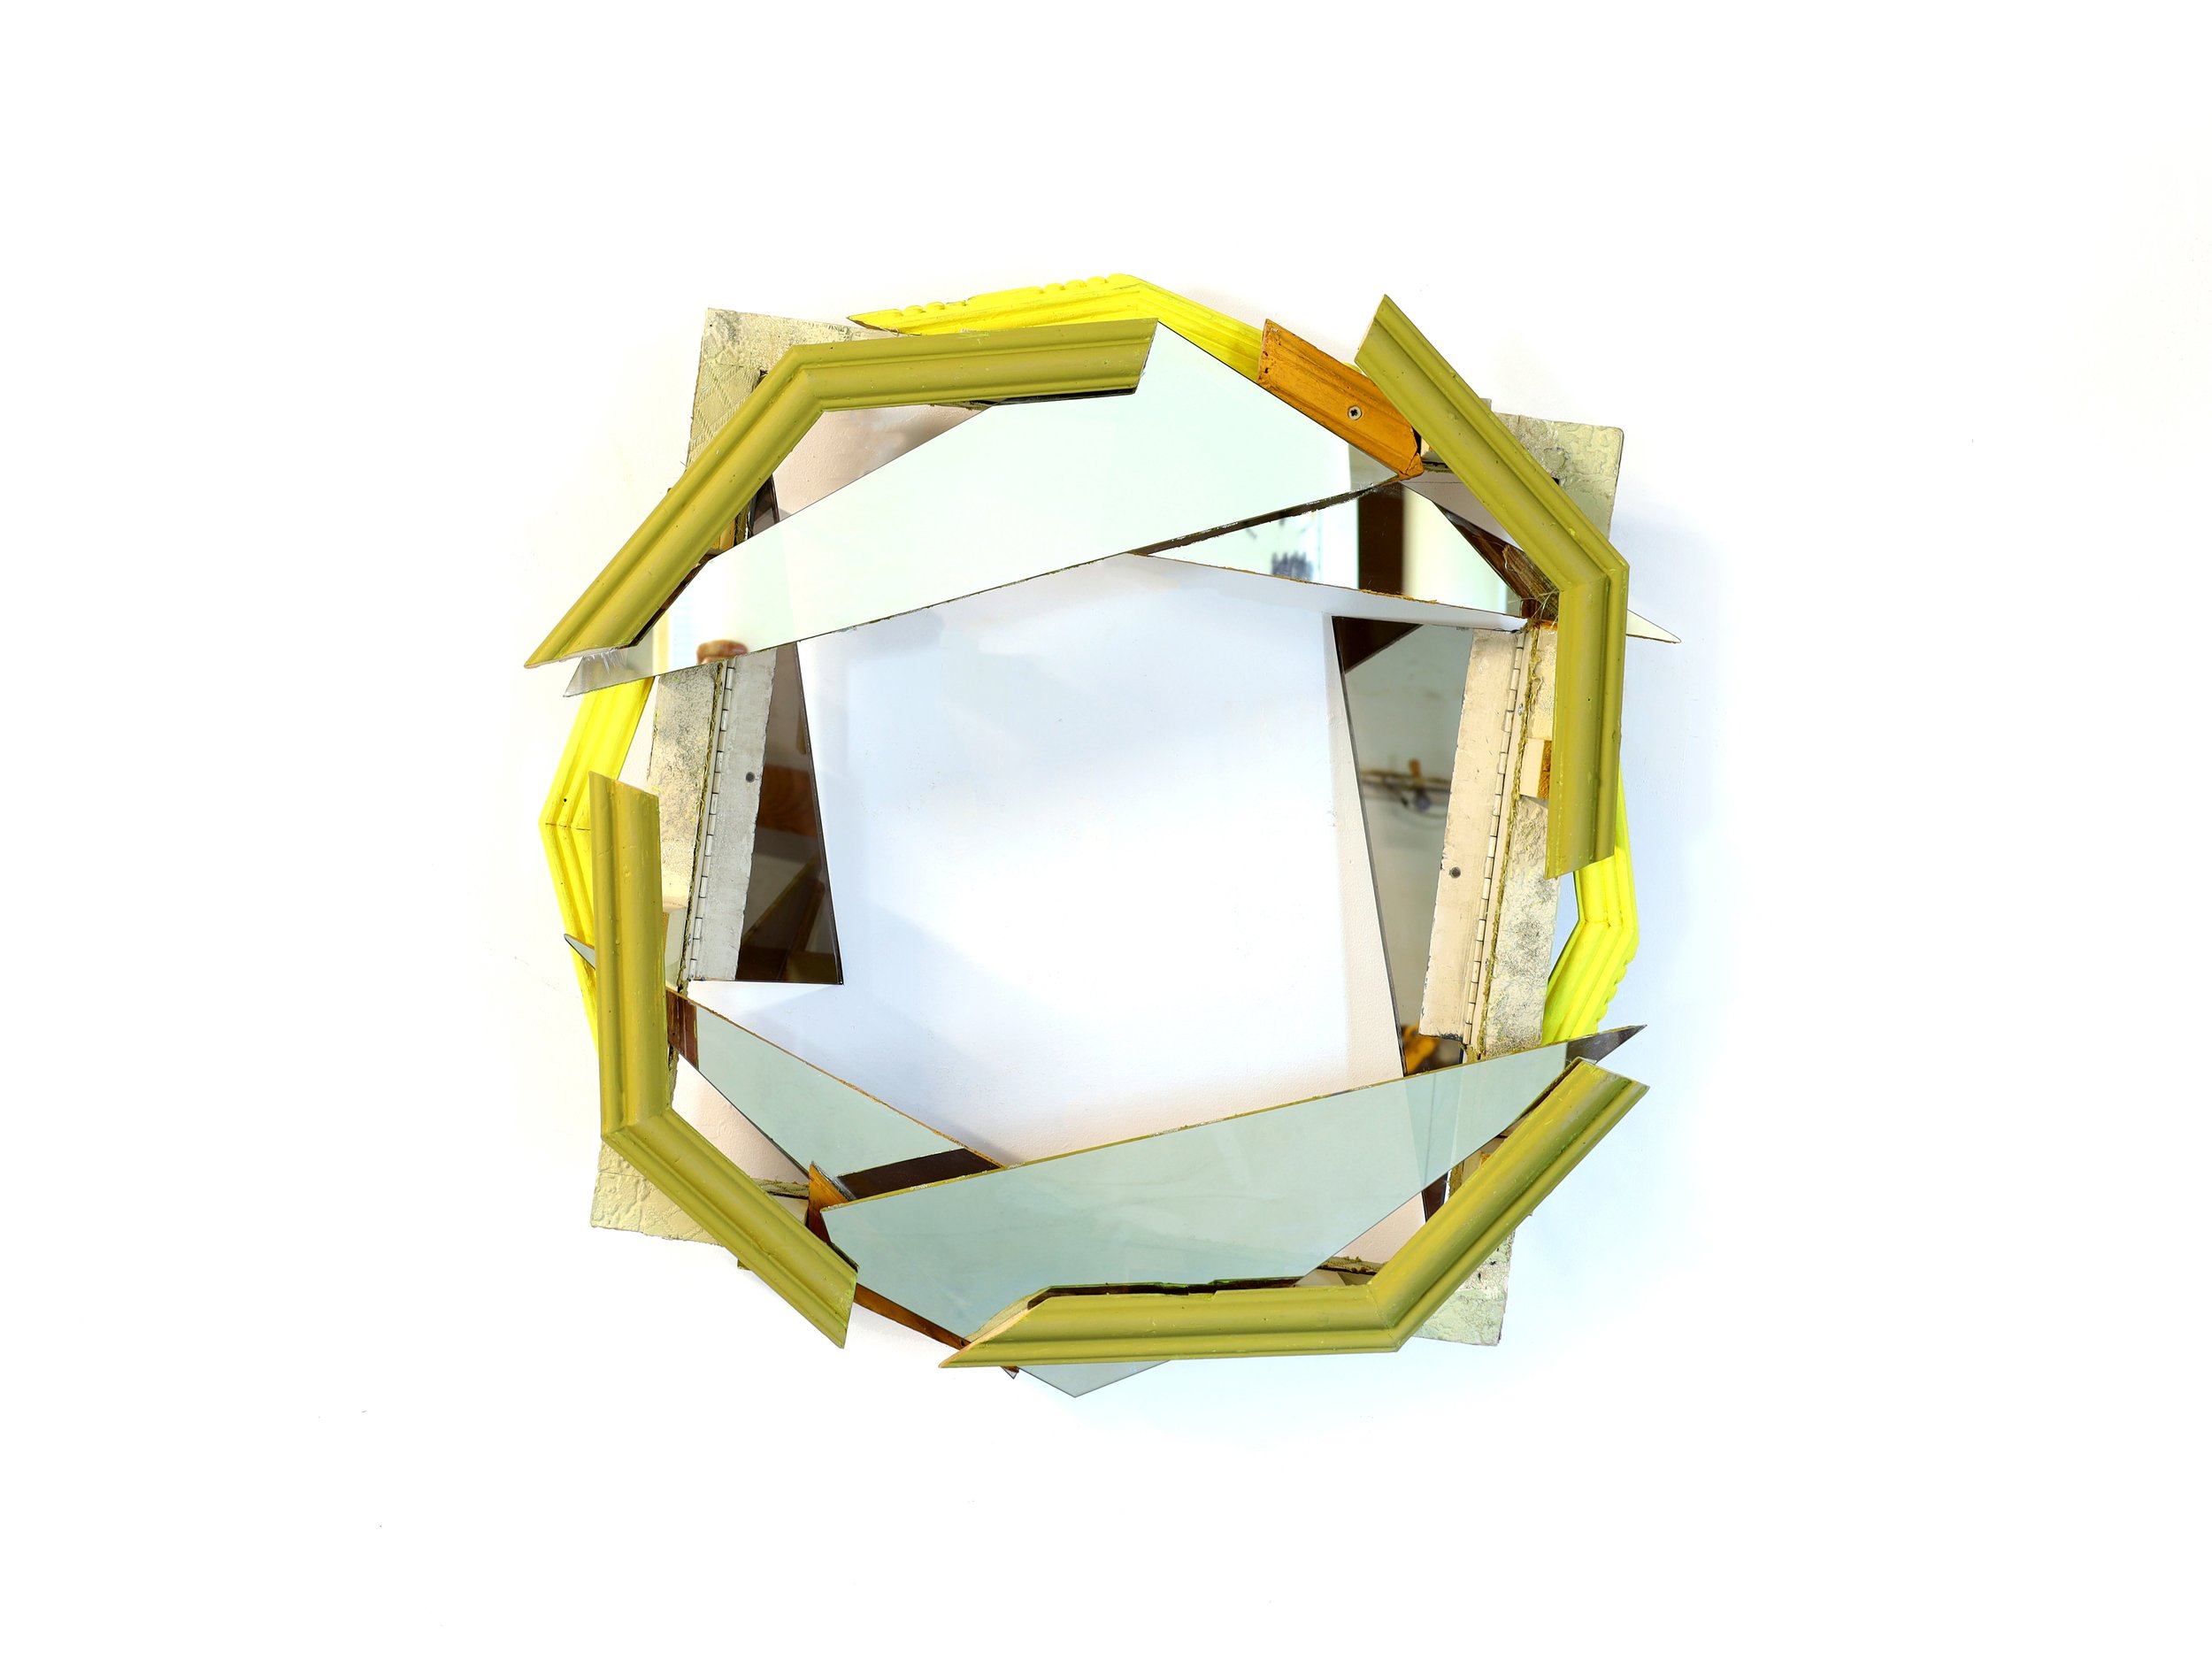  Heather Rowe,  The Idler , 2022, found frames, one-way mirror, mirror, wood, fabric, paint, glass beads, 24 x 24 x 8 inches 